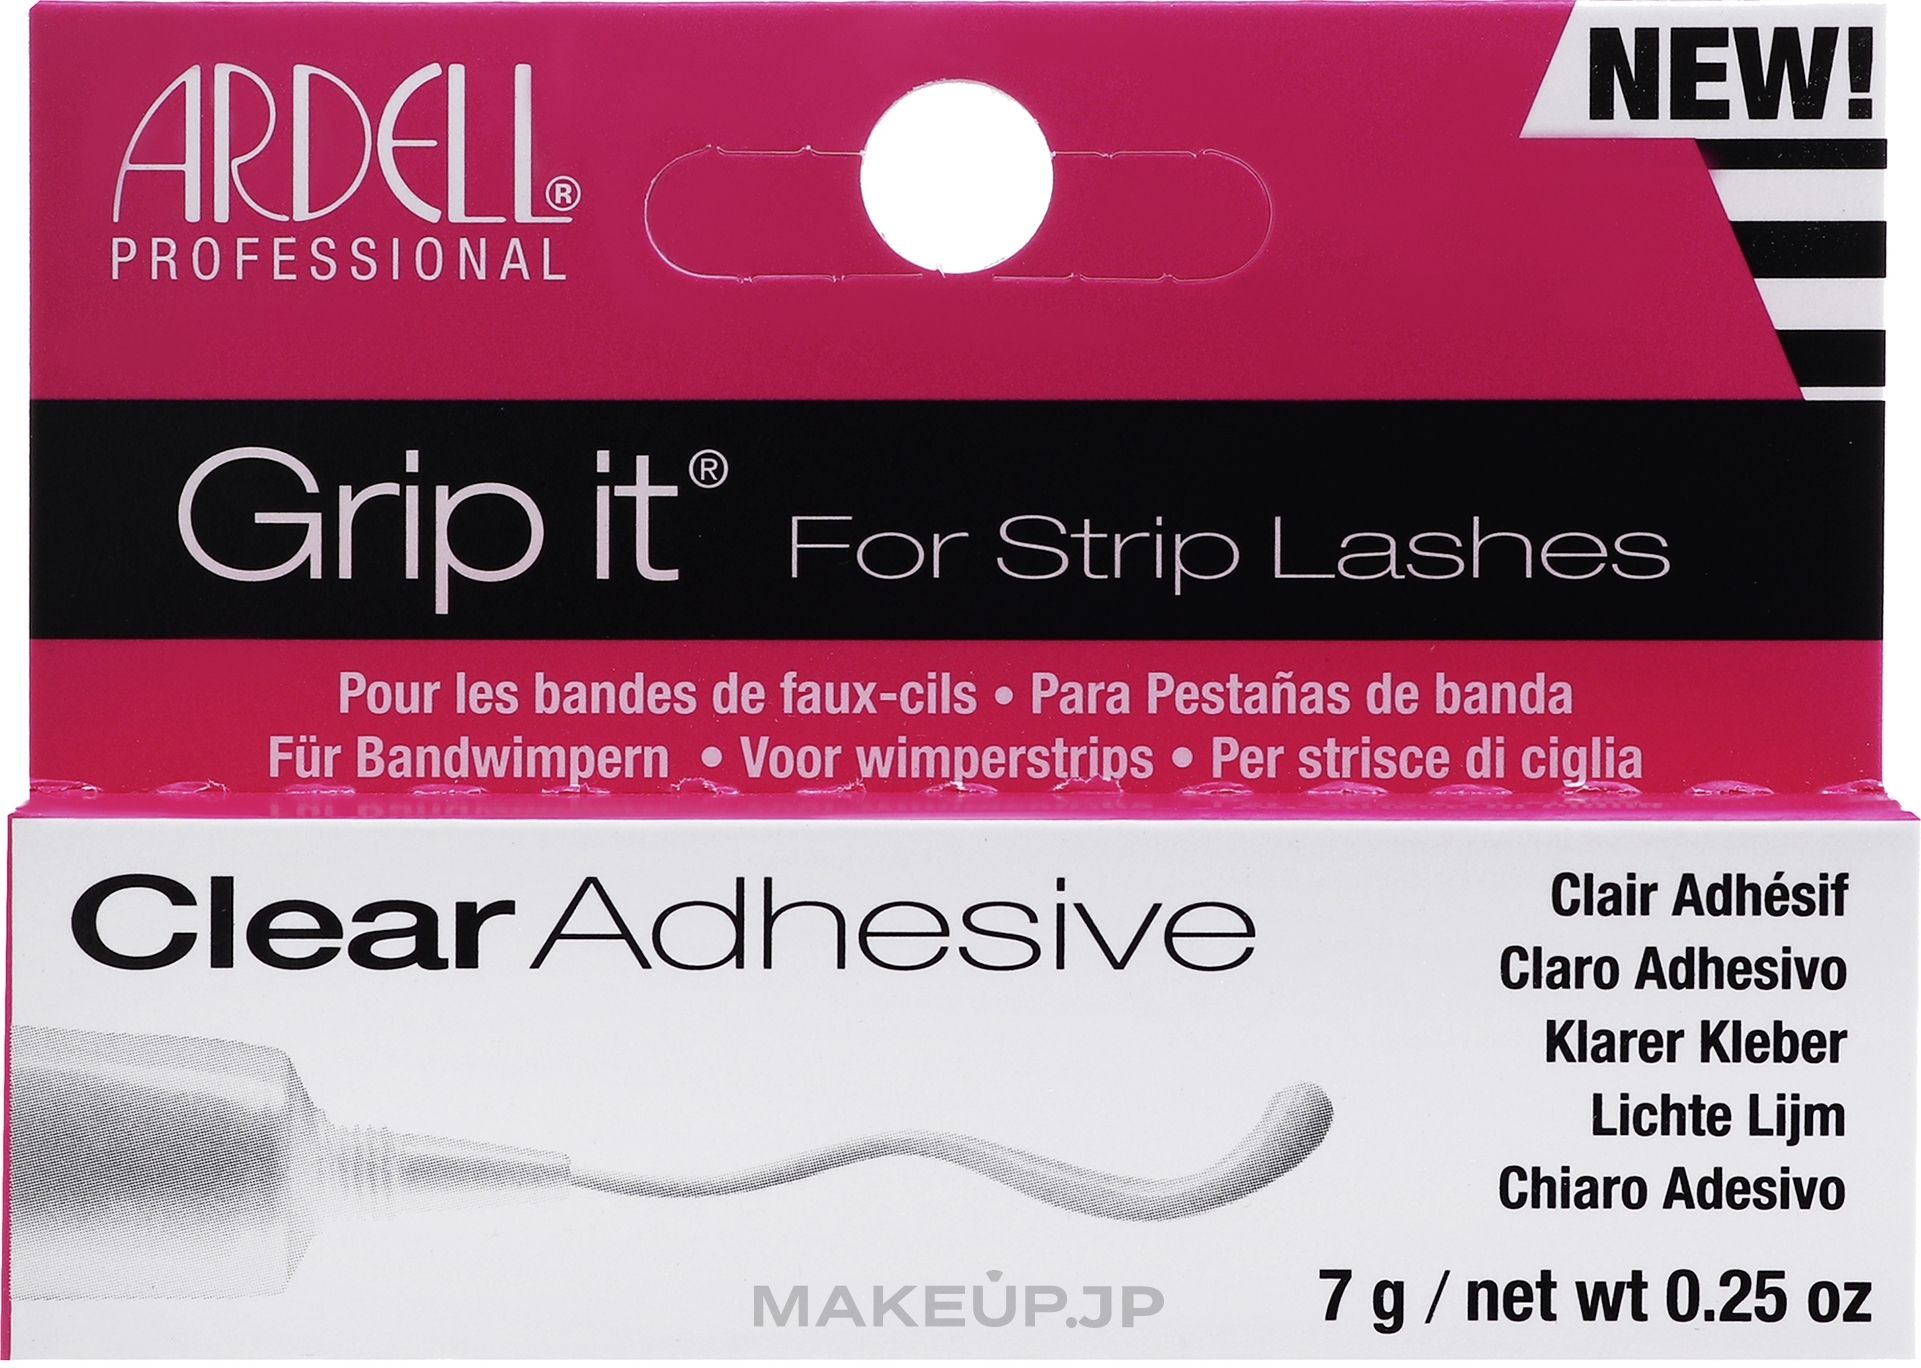 Glue for Classic False Lashes - Ardell Grip it For Strip Lashes — photo Clear